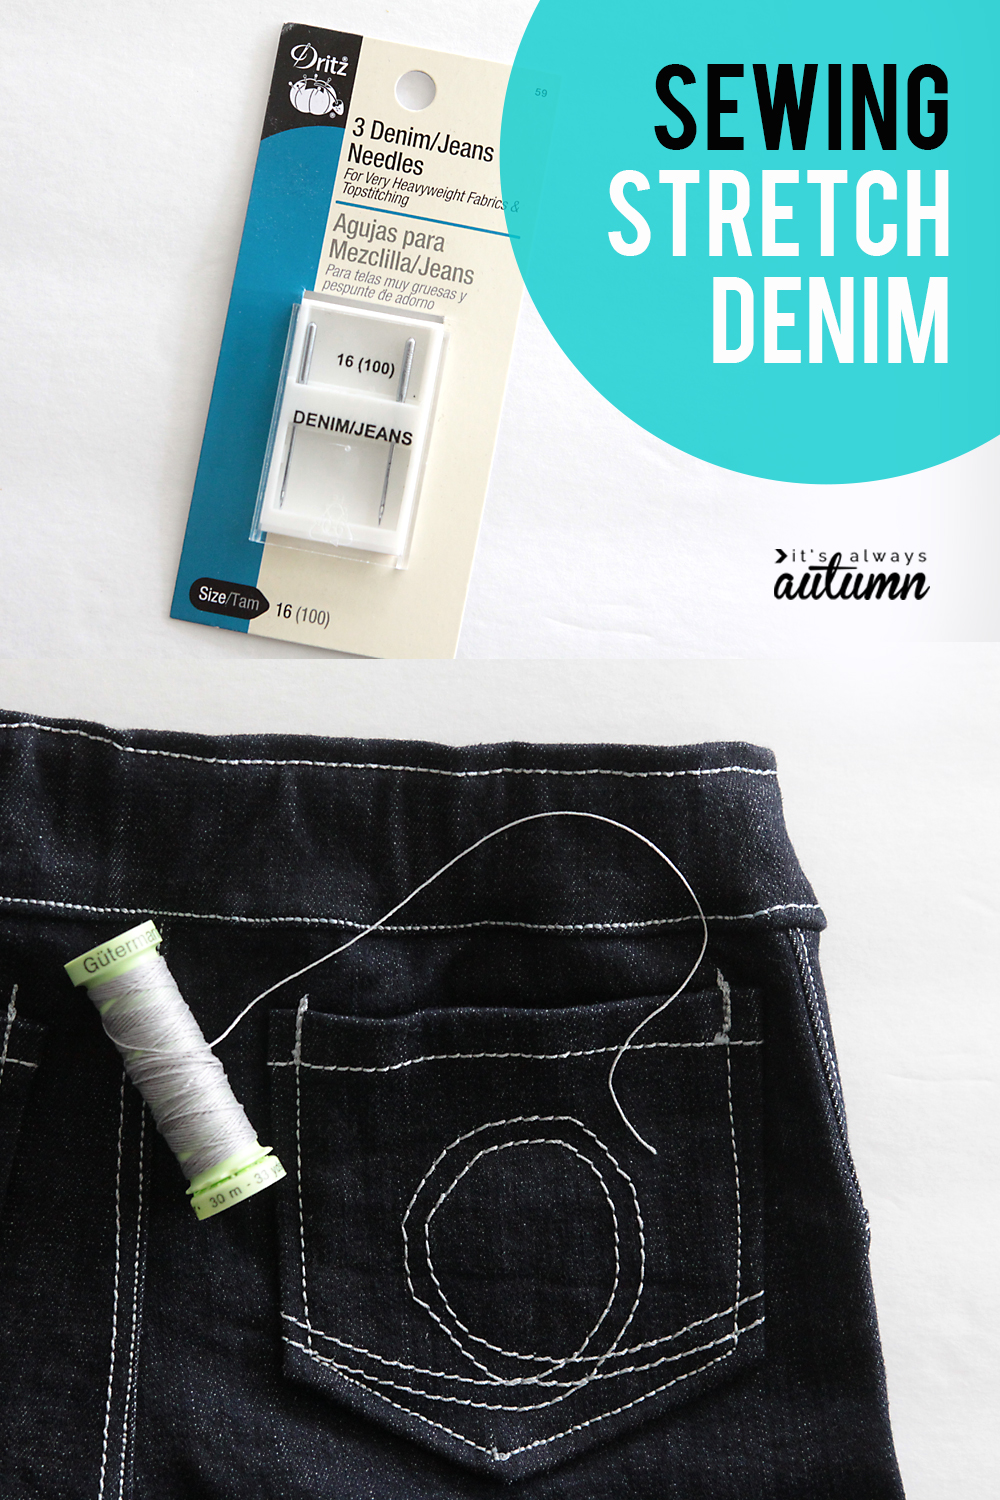 How to sew with stretch denim. Click through for tips and tricks to make sewing stretch denim easy and successful!